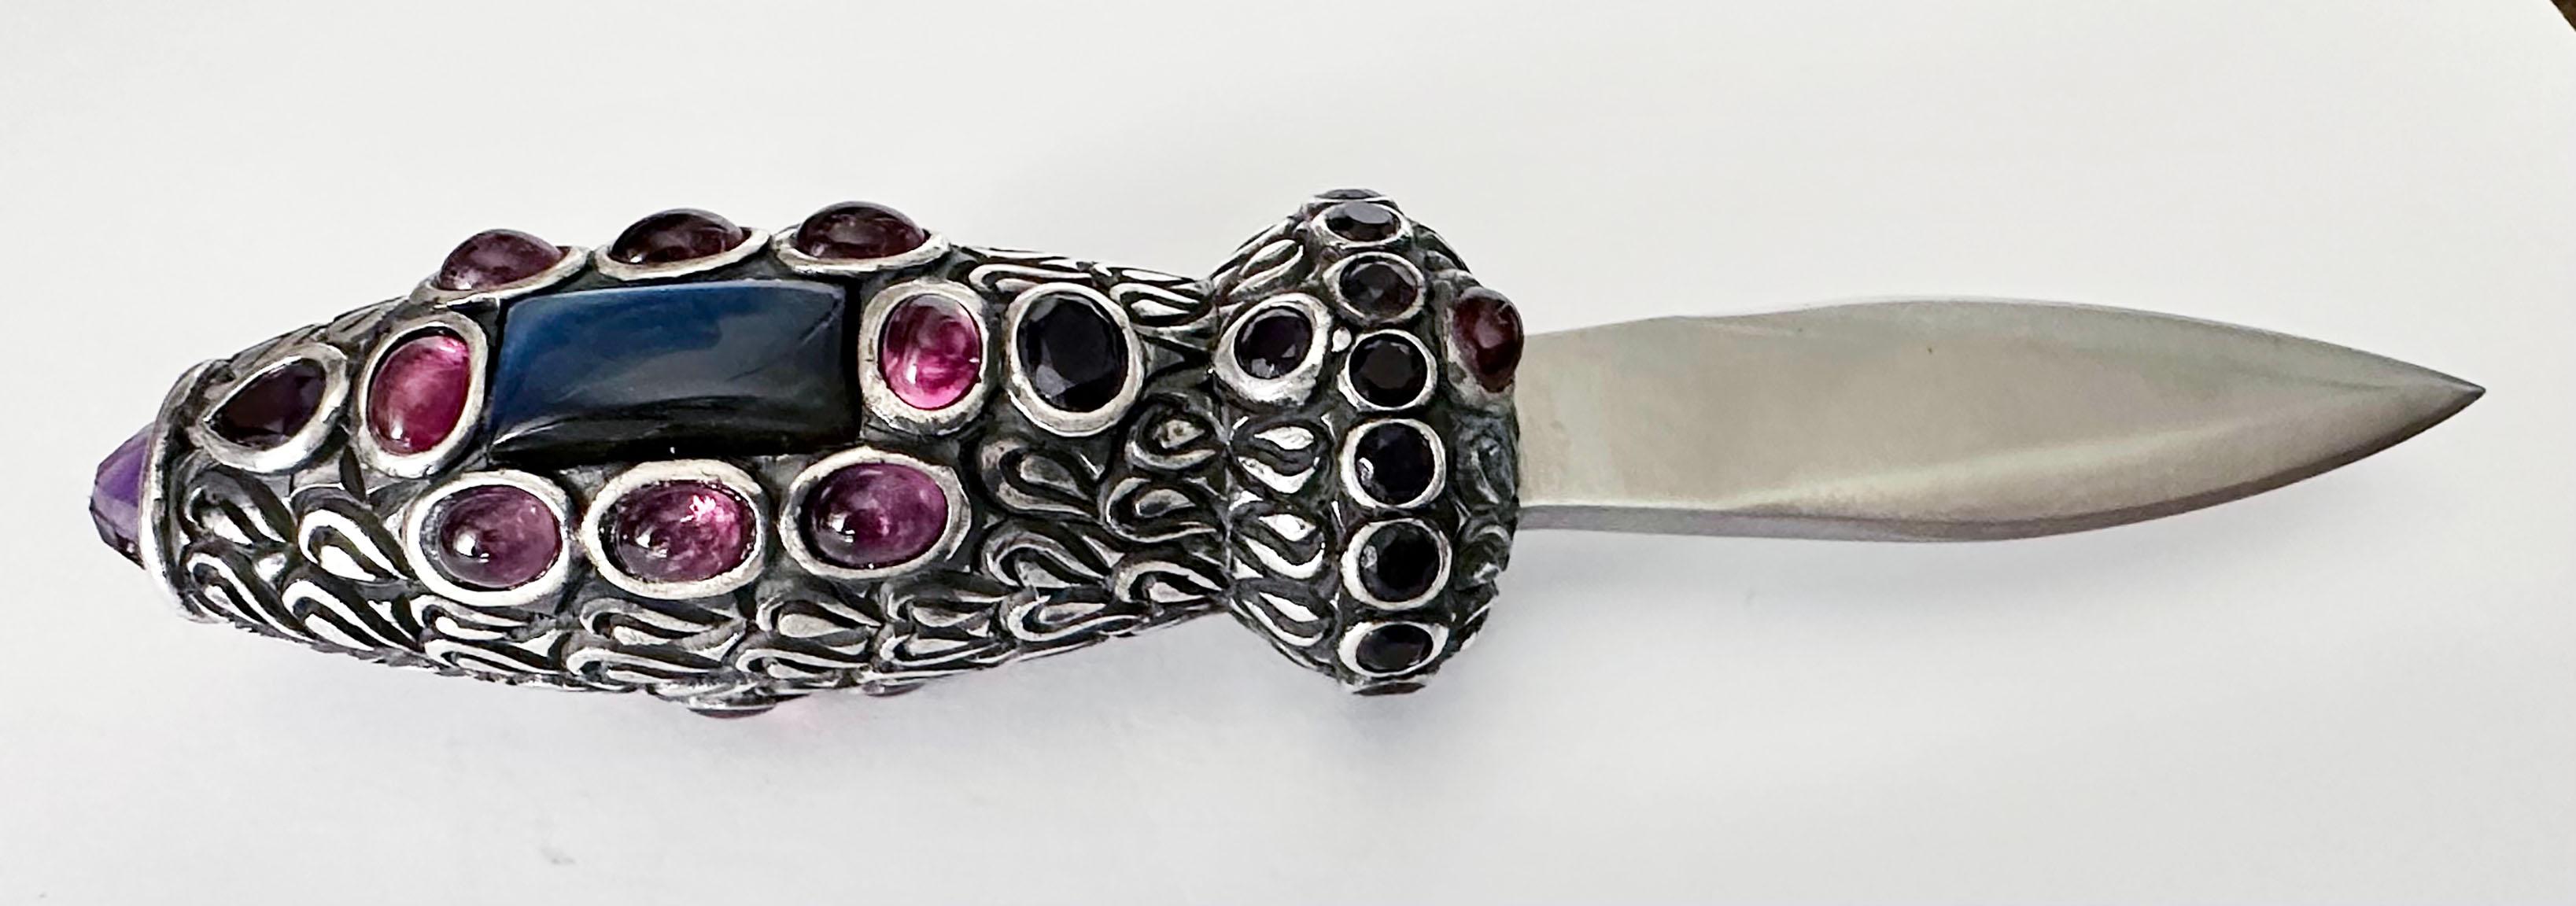 This stunning letter opener is a must-have addition to any desk or collection. The handle is crafted from high-quality silver and adorned with beautiful amethyst, rubellite, and labradorite stones. The unique design and exquisite details make this